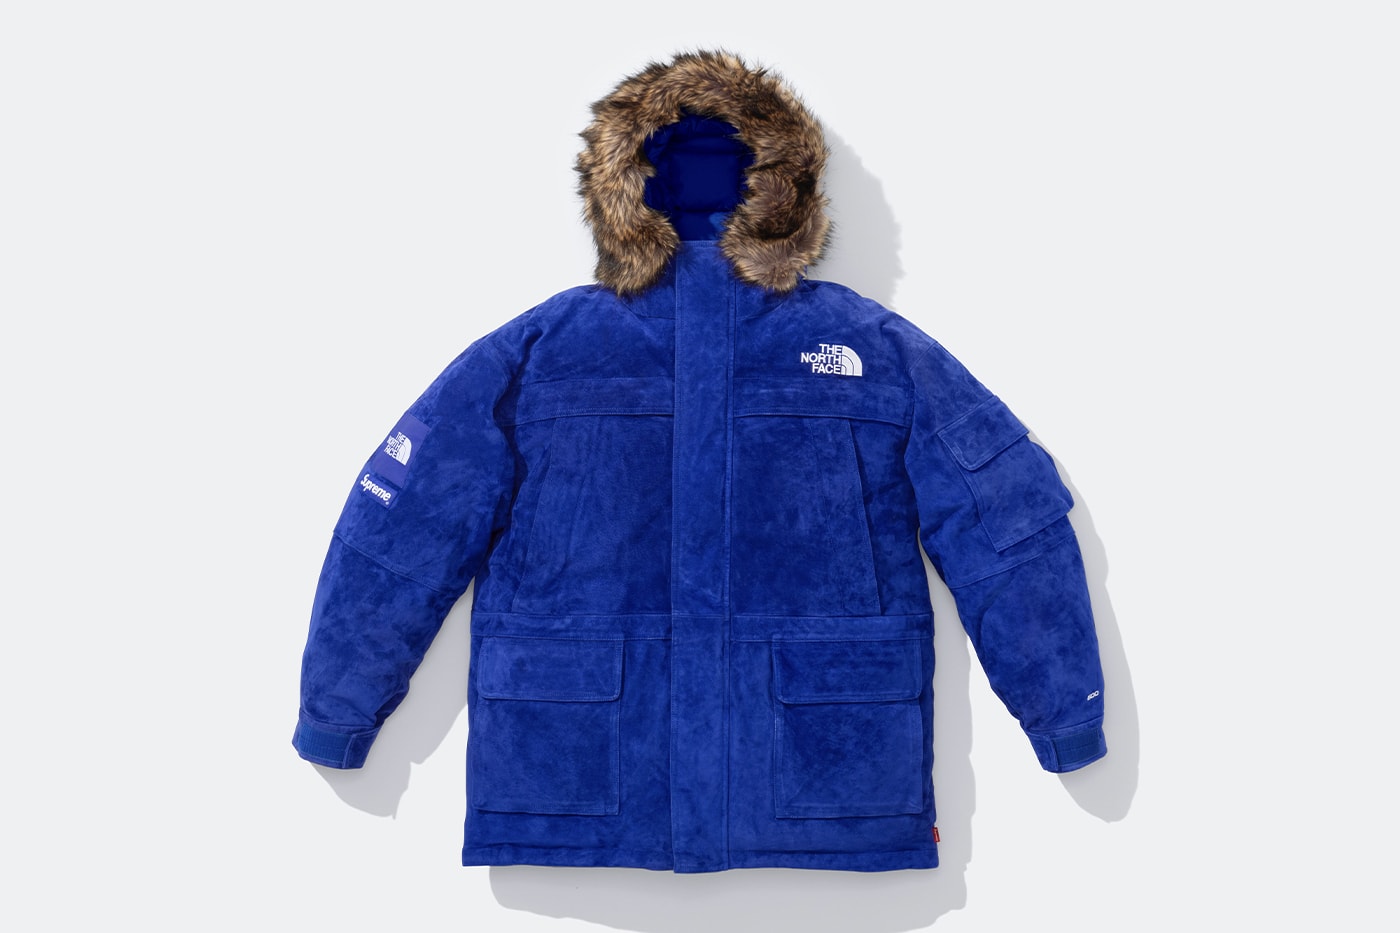 The Latest Supreme x The North Face Drop Is Full of Sick Suede Parkas